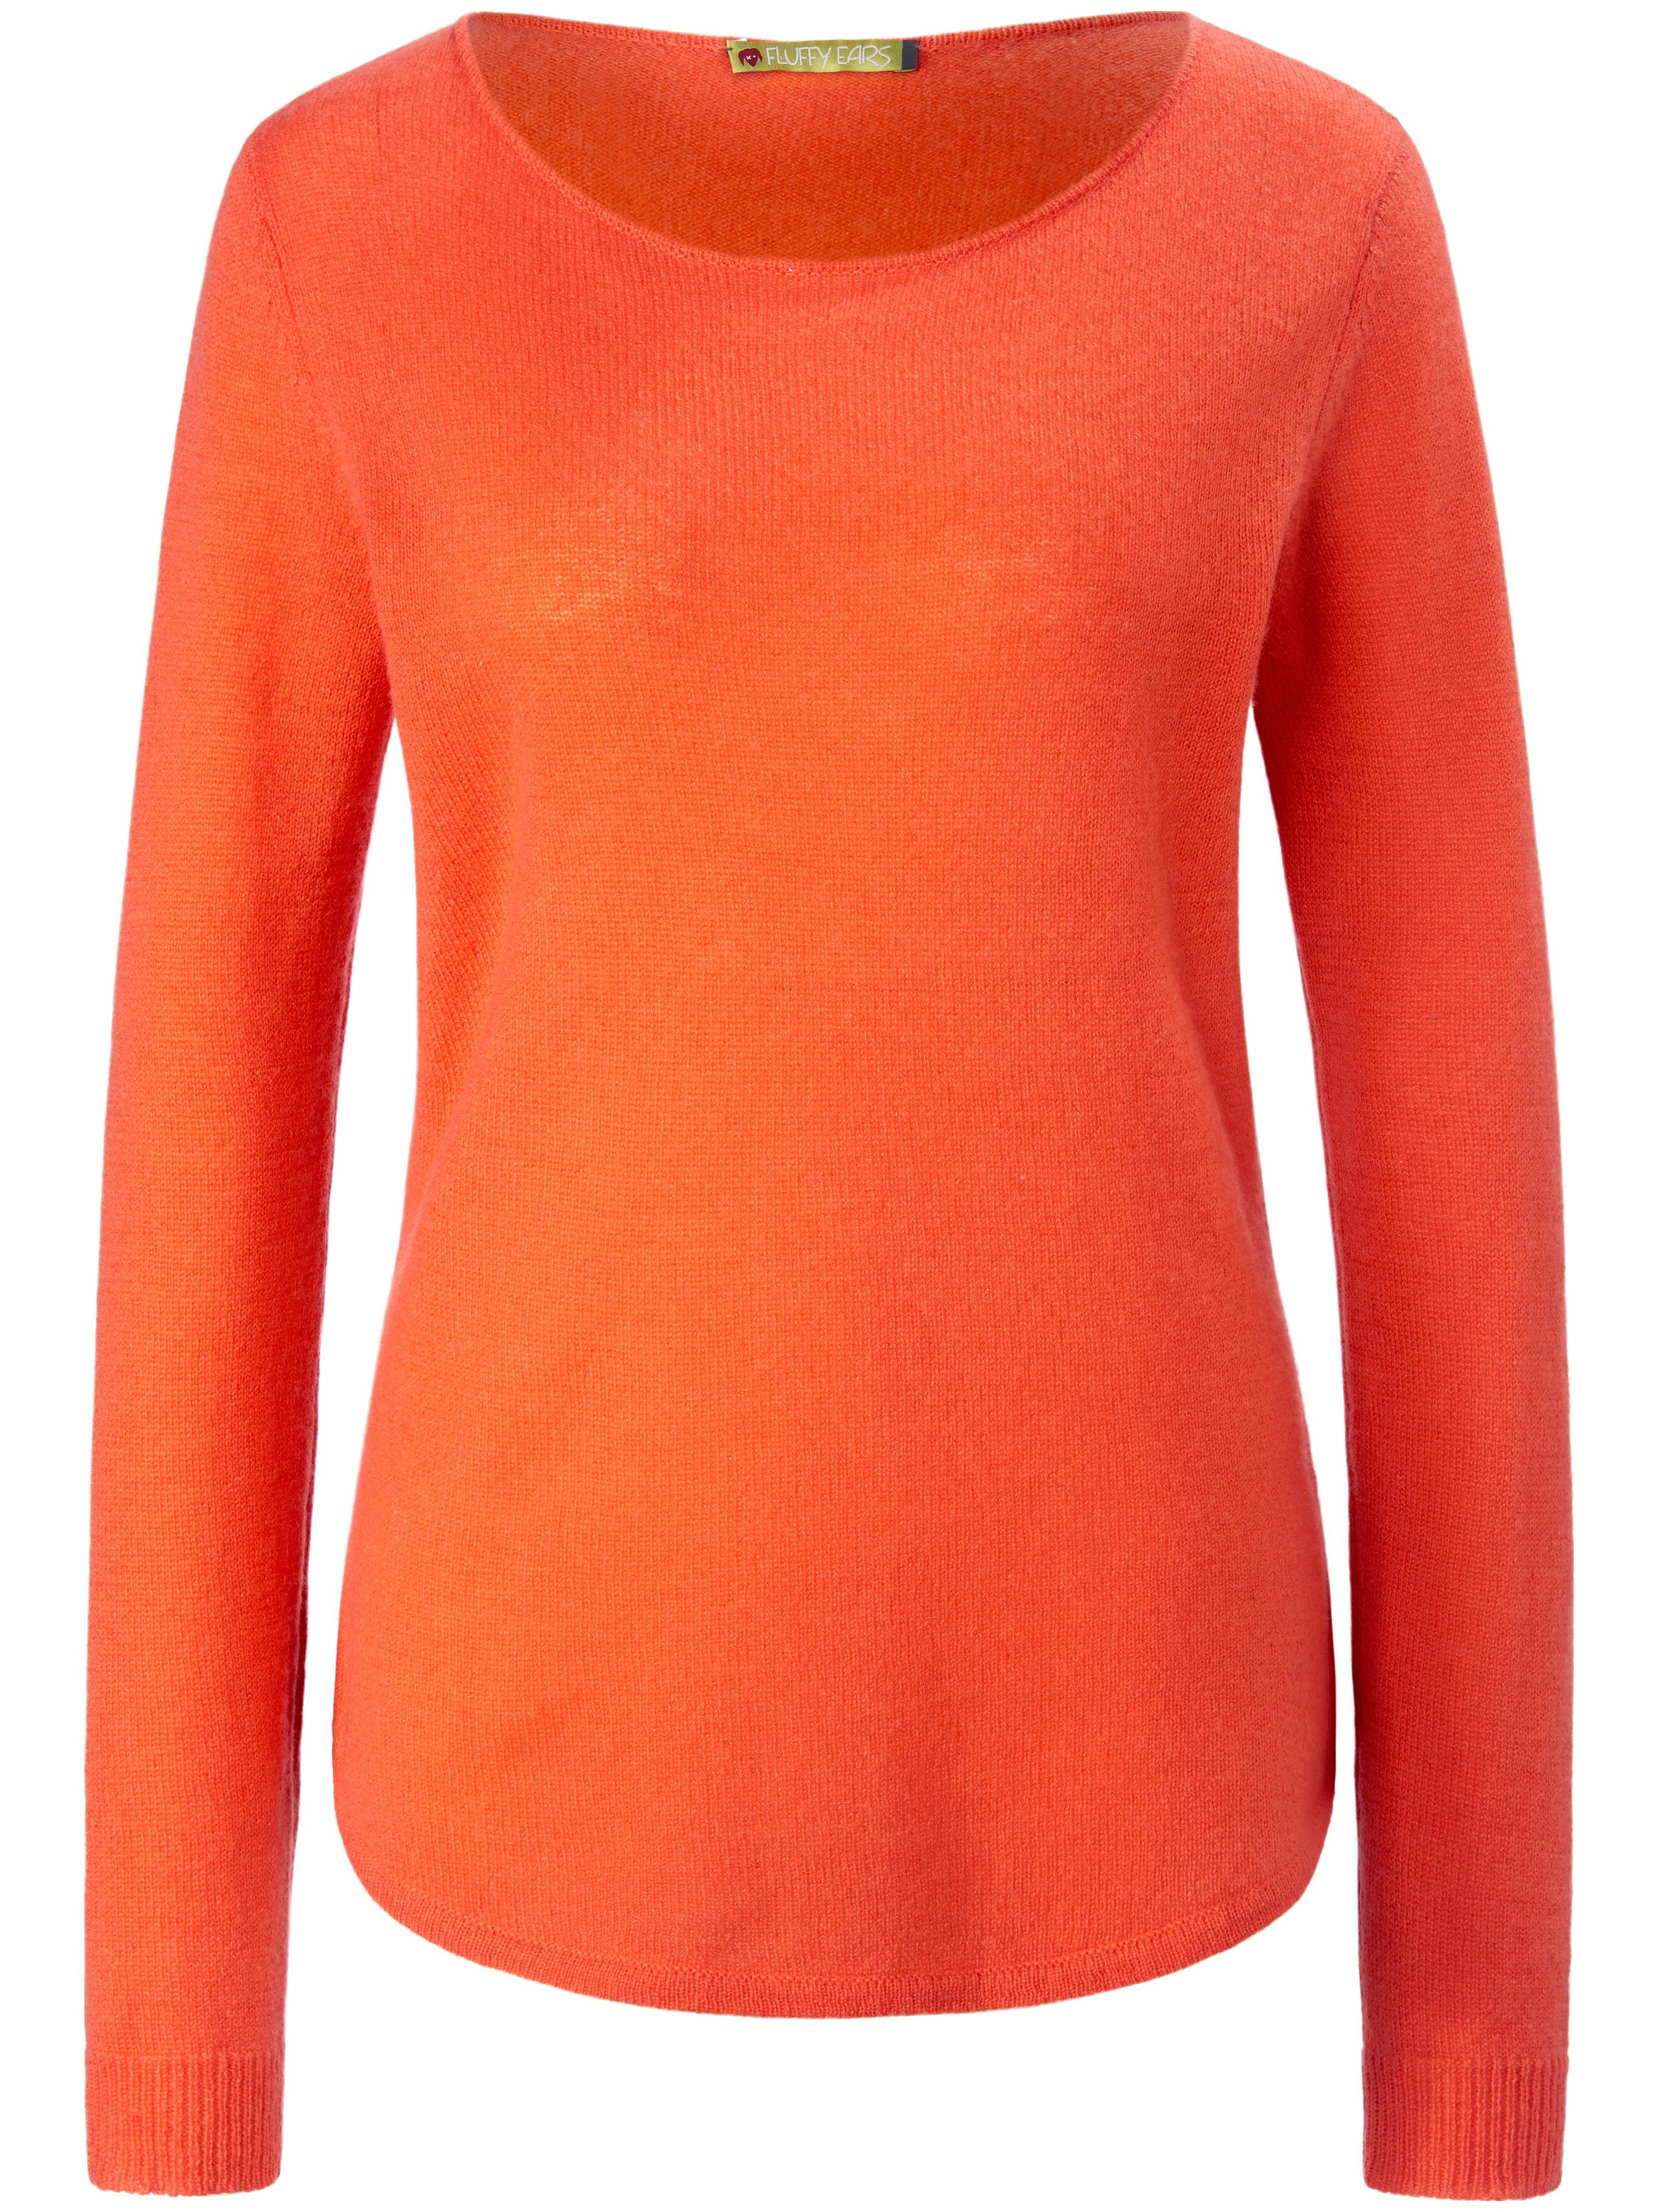 Le pull 100% cachemire  FLUFFY EARS orange taille 48